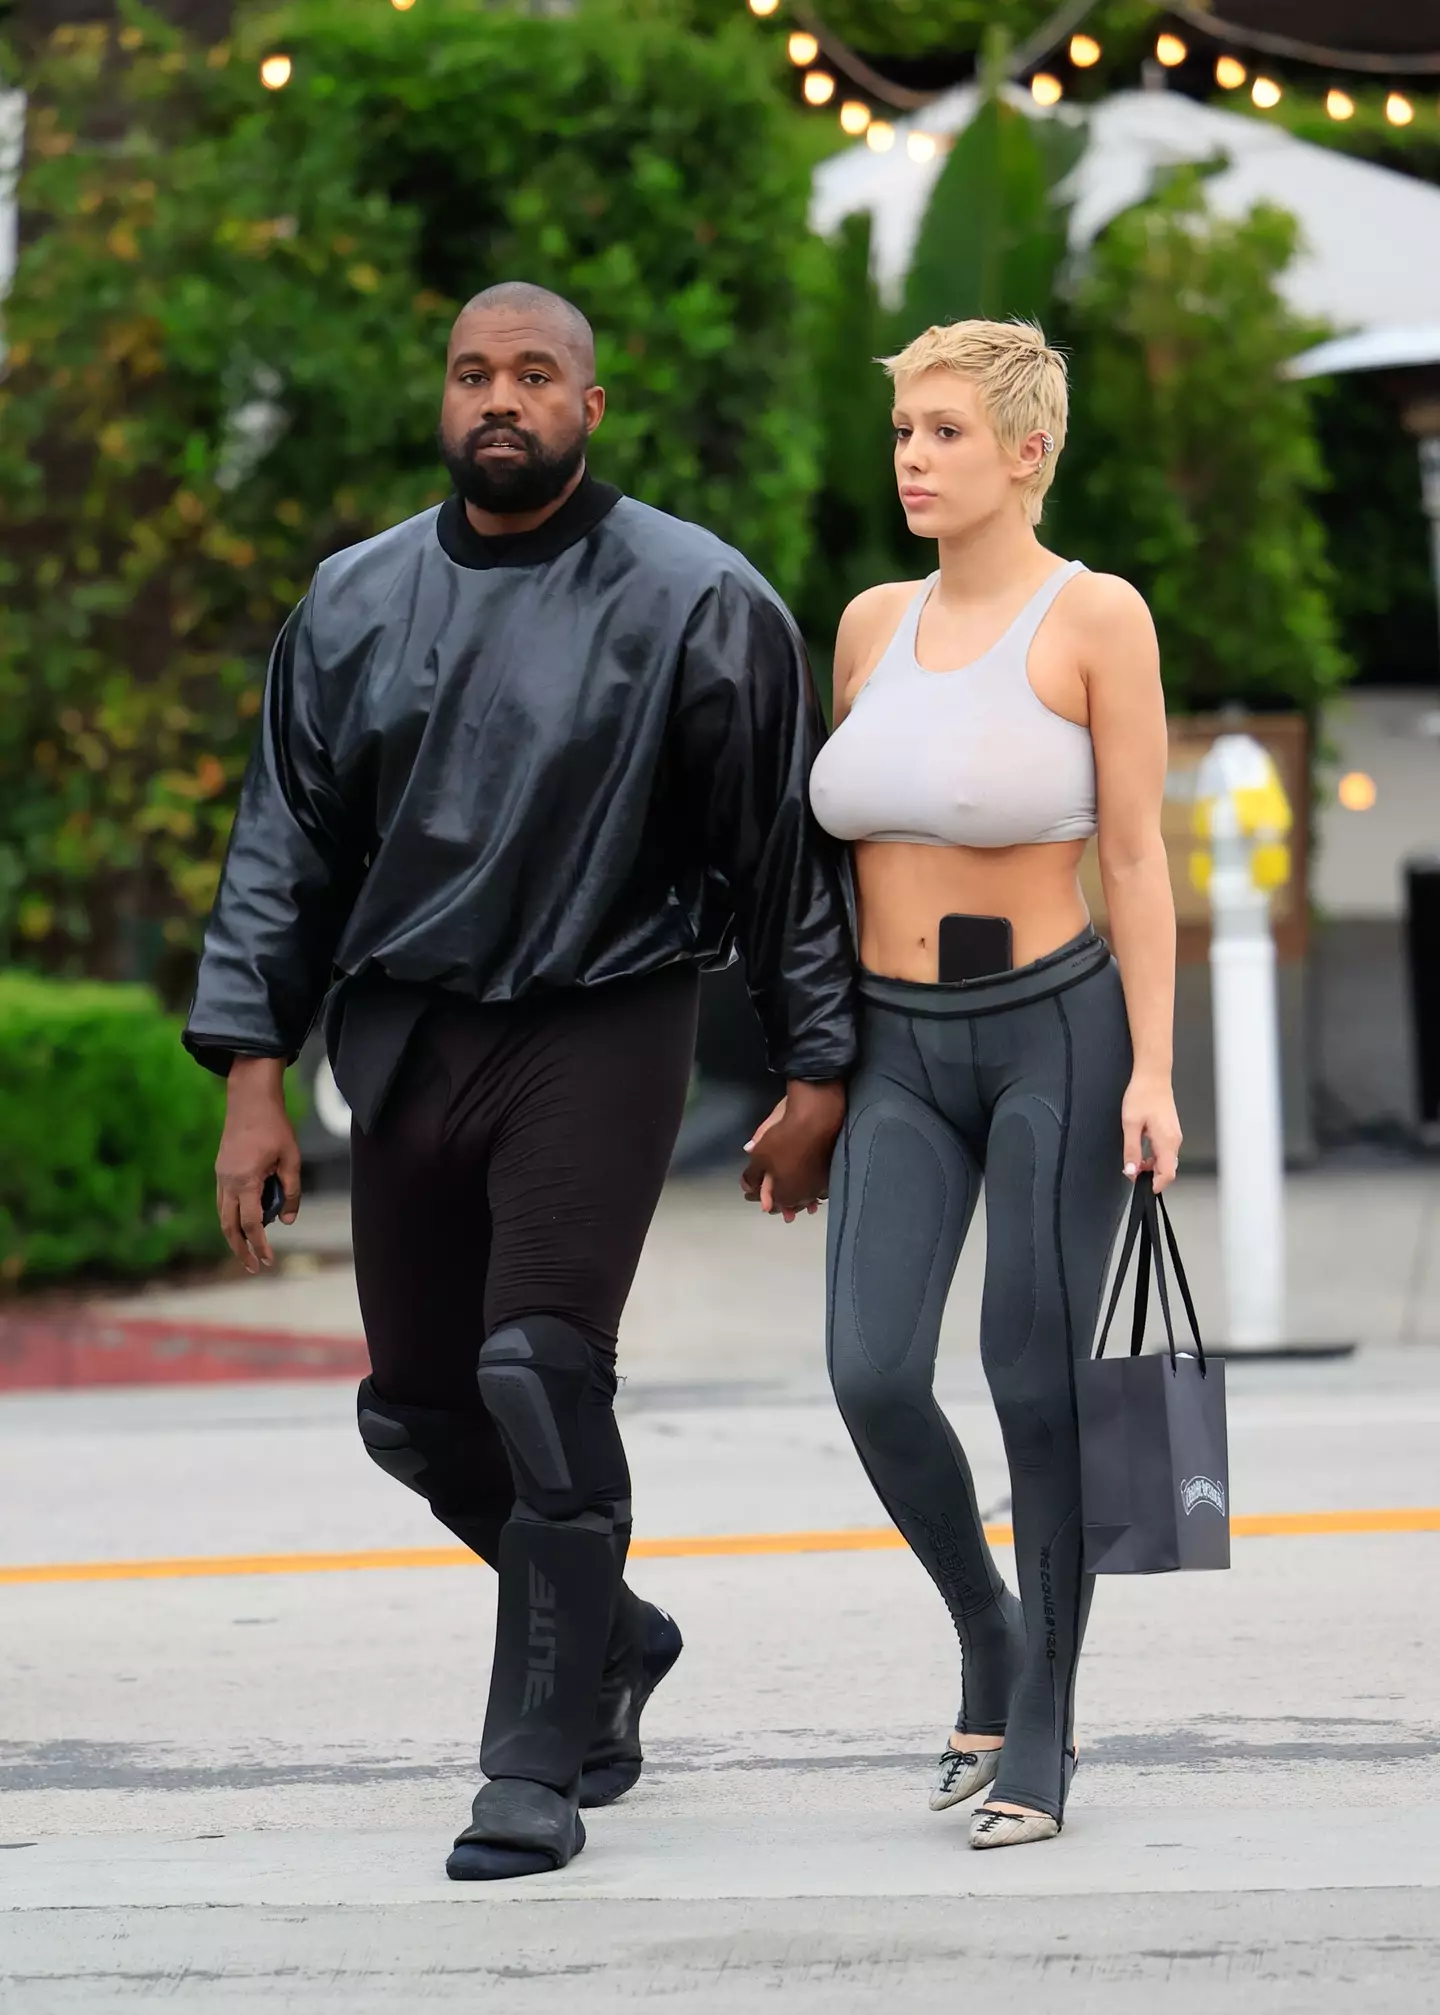 Kanye West and his wife Bianca Censori in LA.